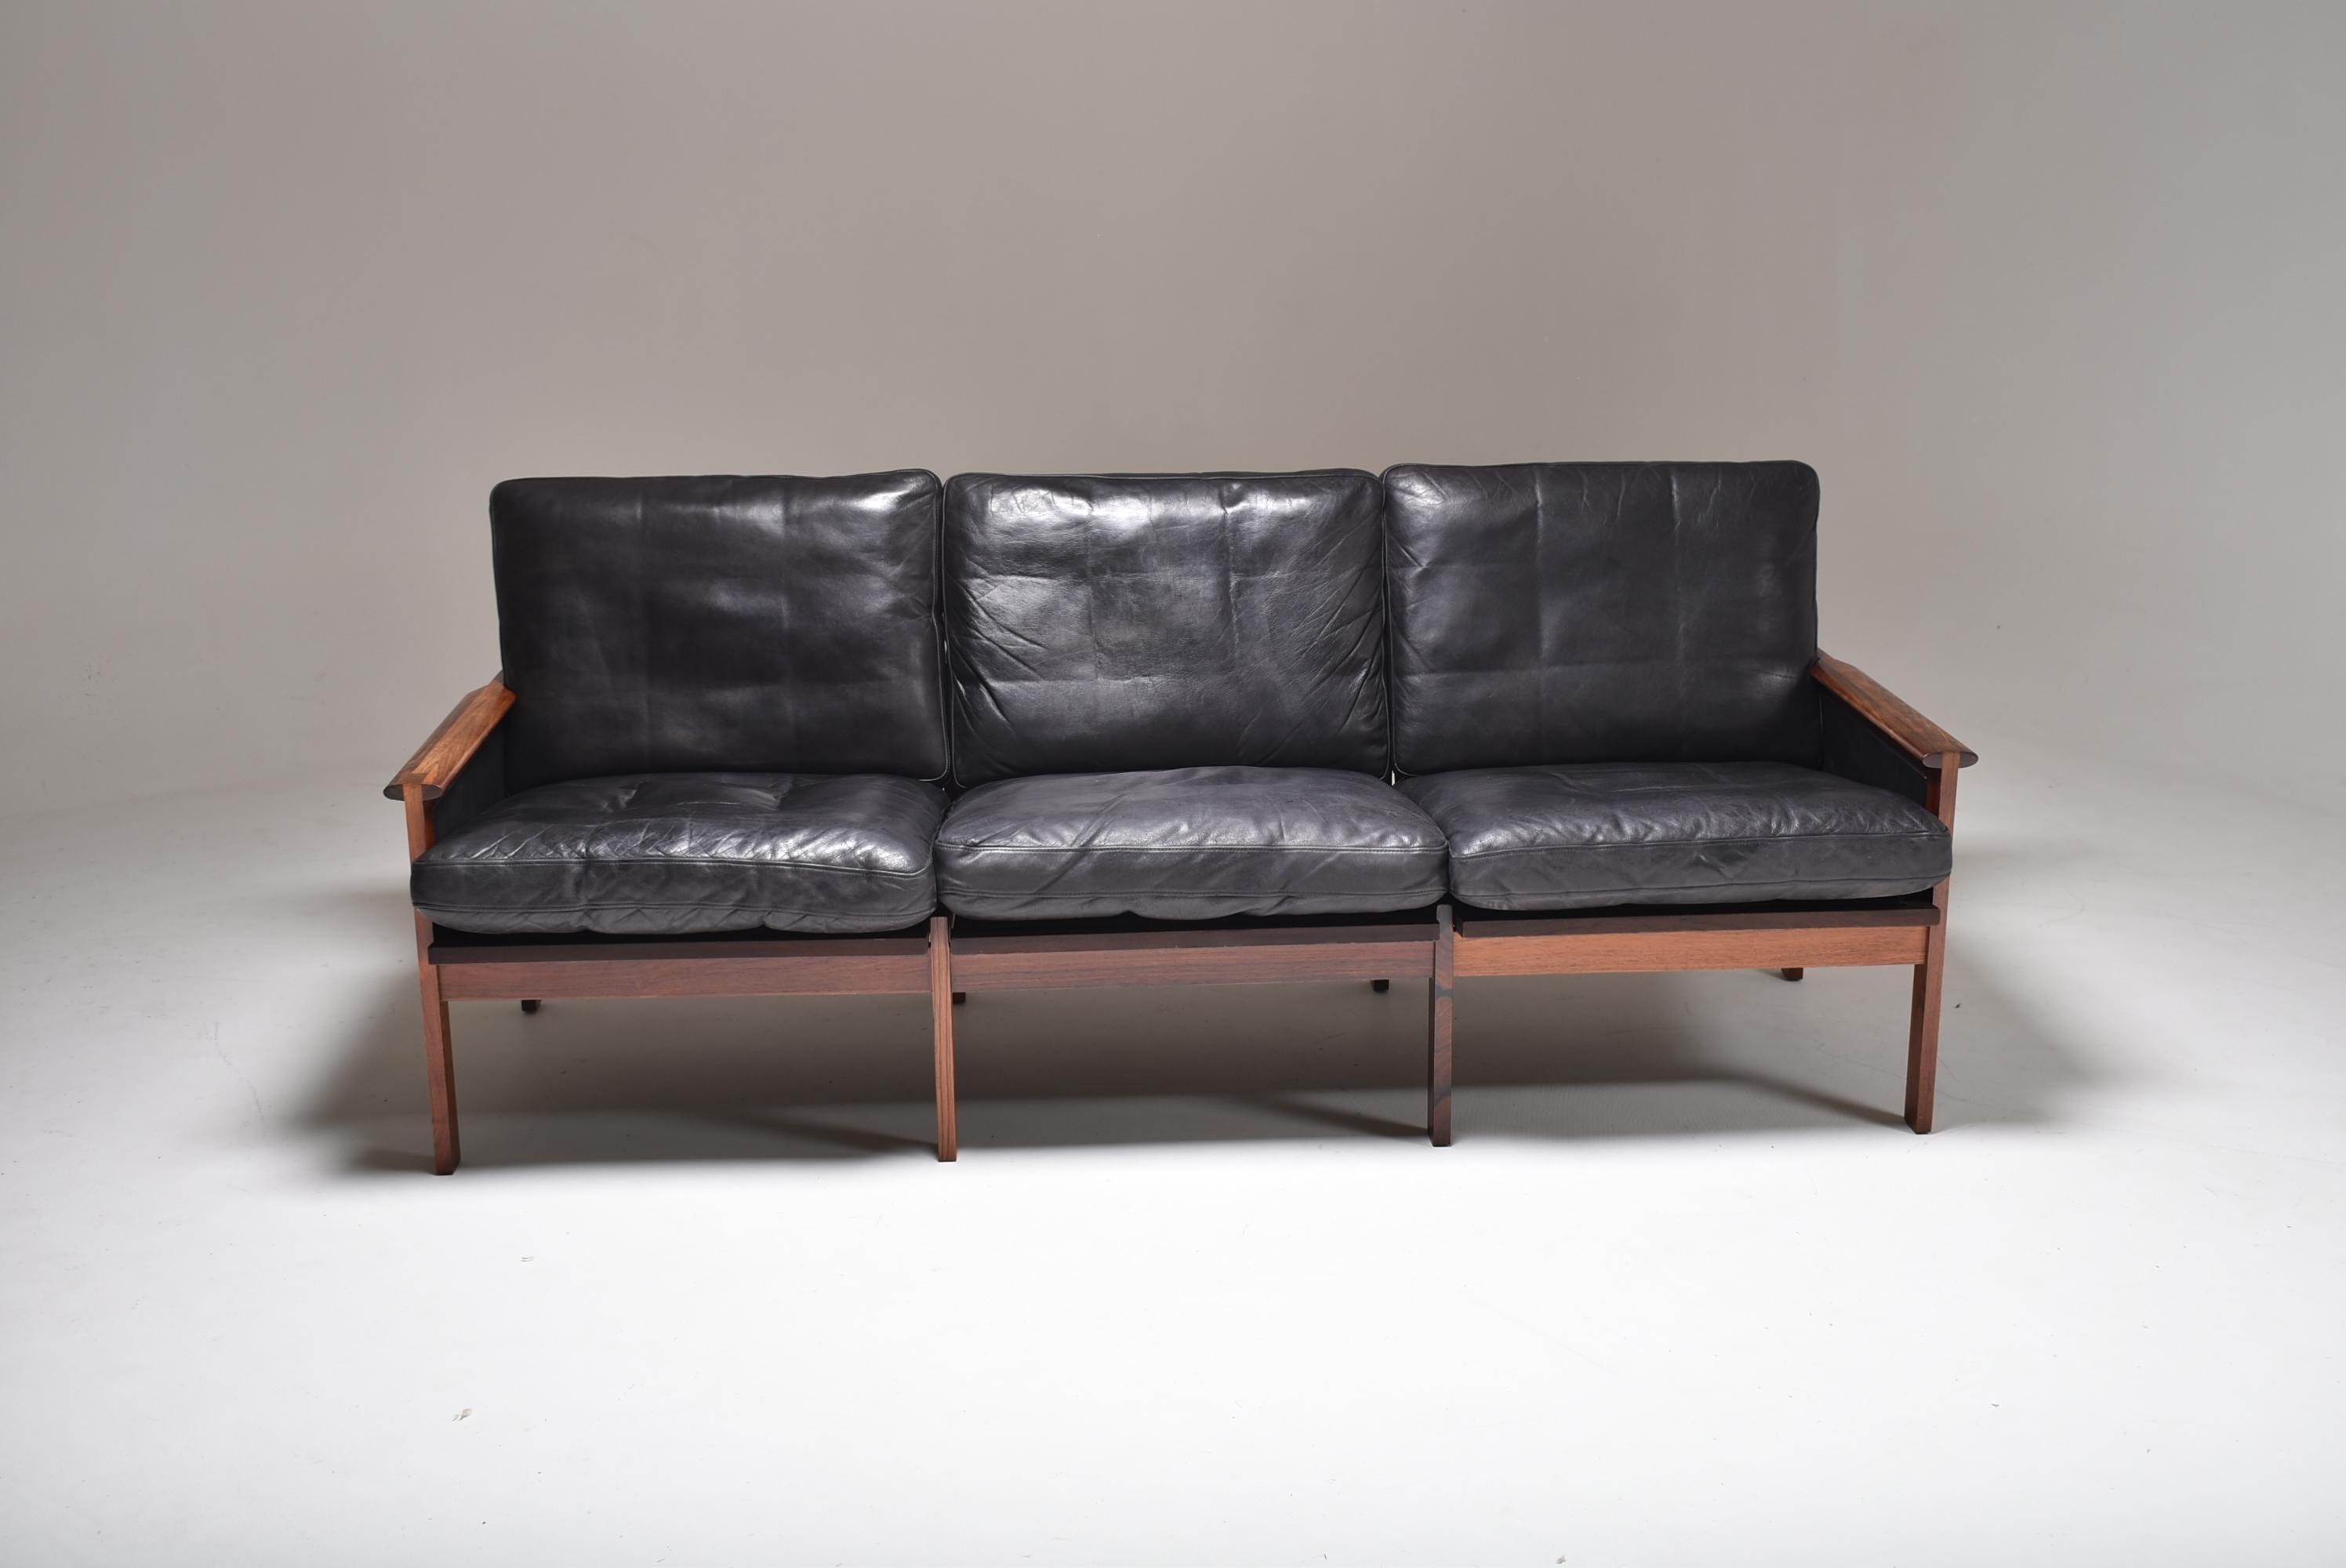 3 seater sofa designed by Illum Wikkelso for Niels Eilersen. 
It is made of solid Brazilian rosewood and original black leather.
Very comfortable and made to last. The frame is very solid and the leather has nice patina.